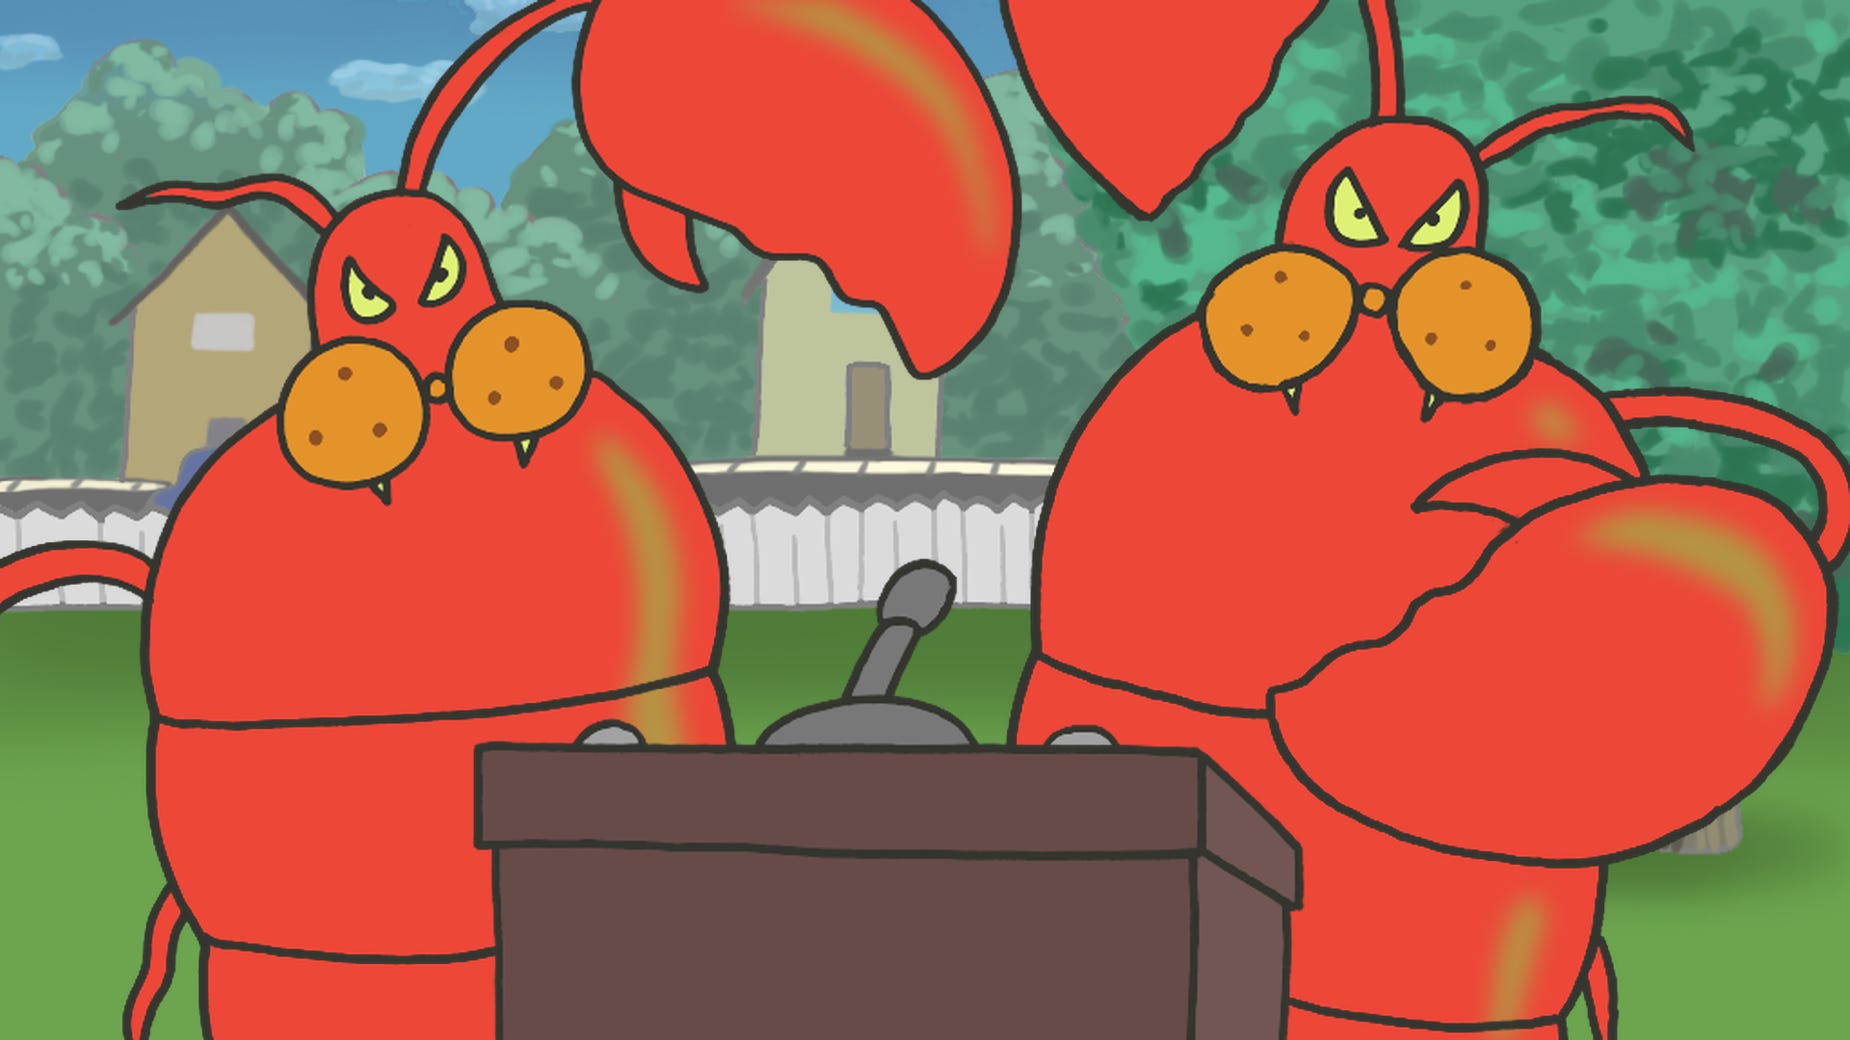 GIant Lobsters try to communicate, from Invasion of the Space Lobsters